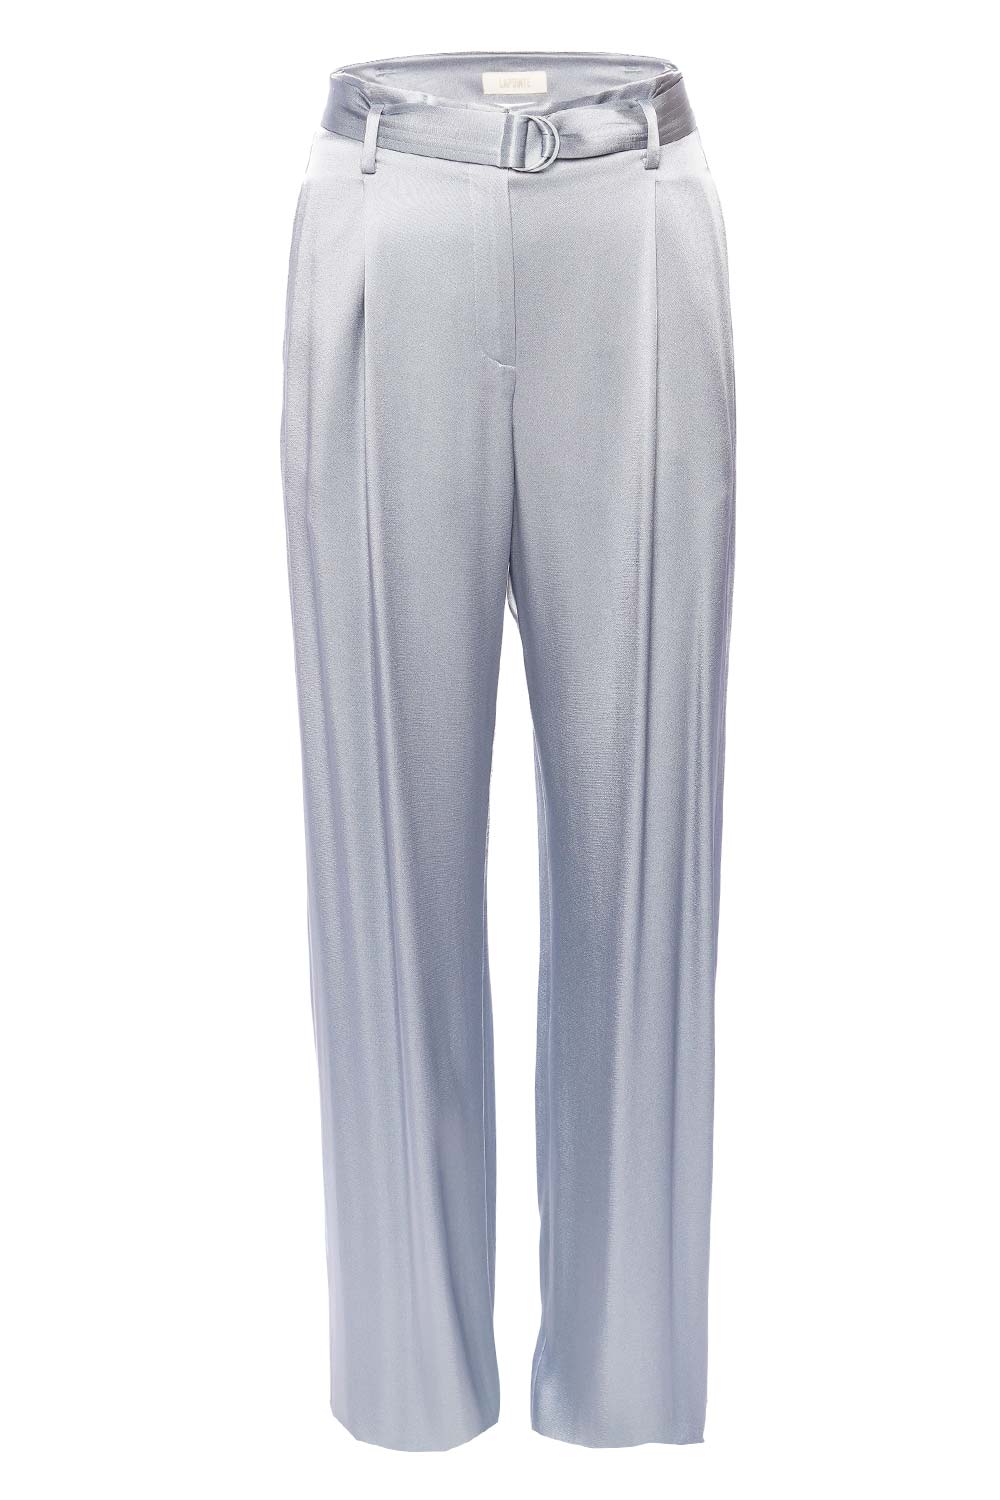 LAPOINTE Dove Satin High Waisted Belted Pant